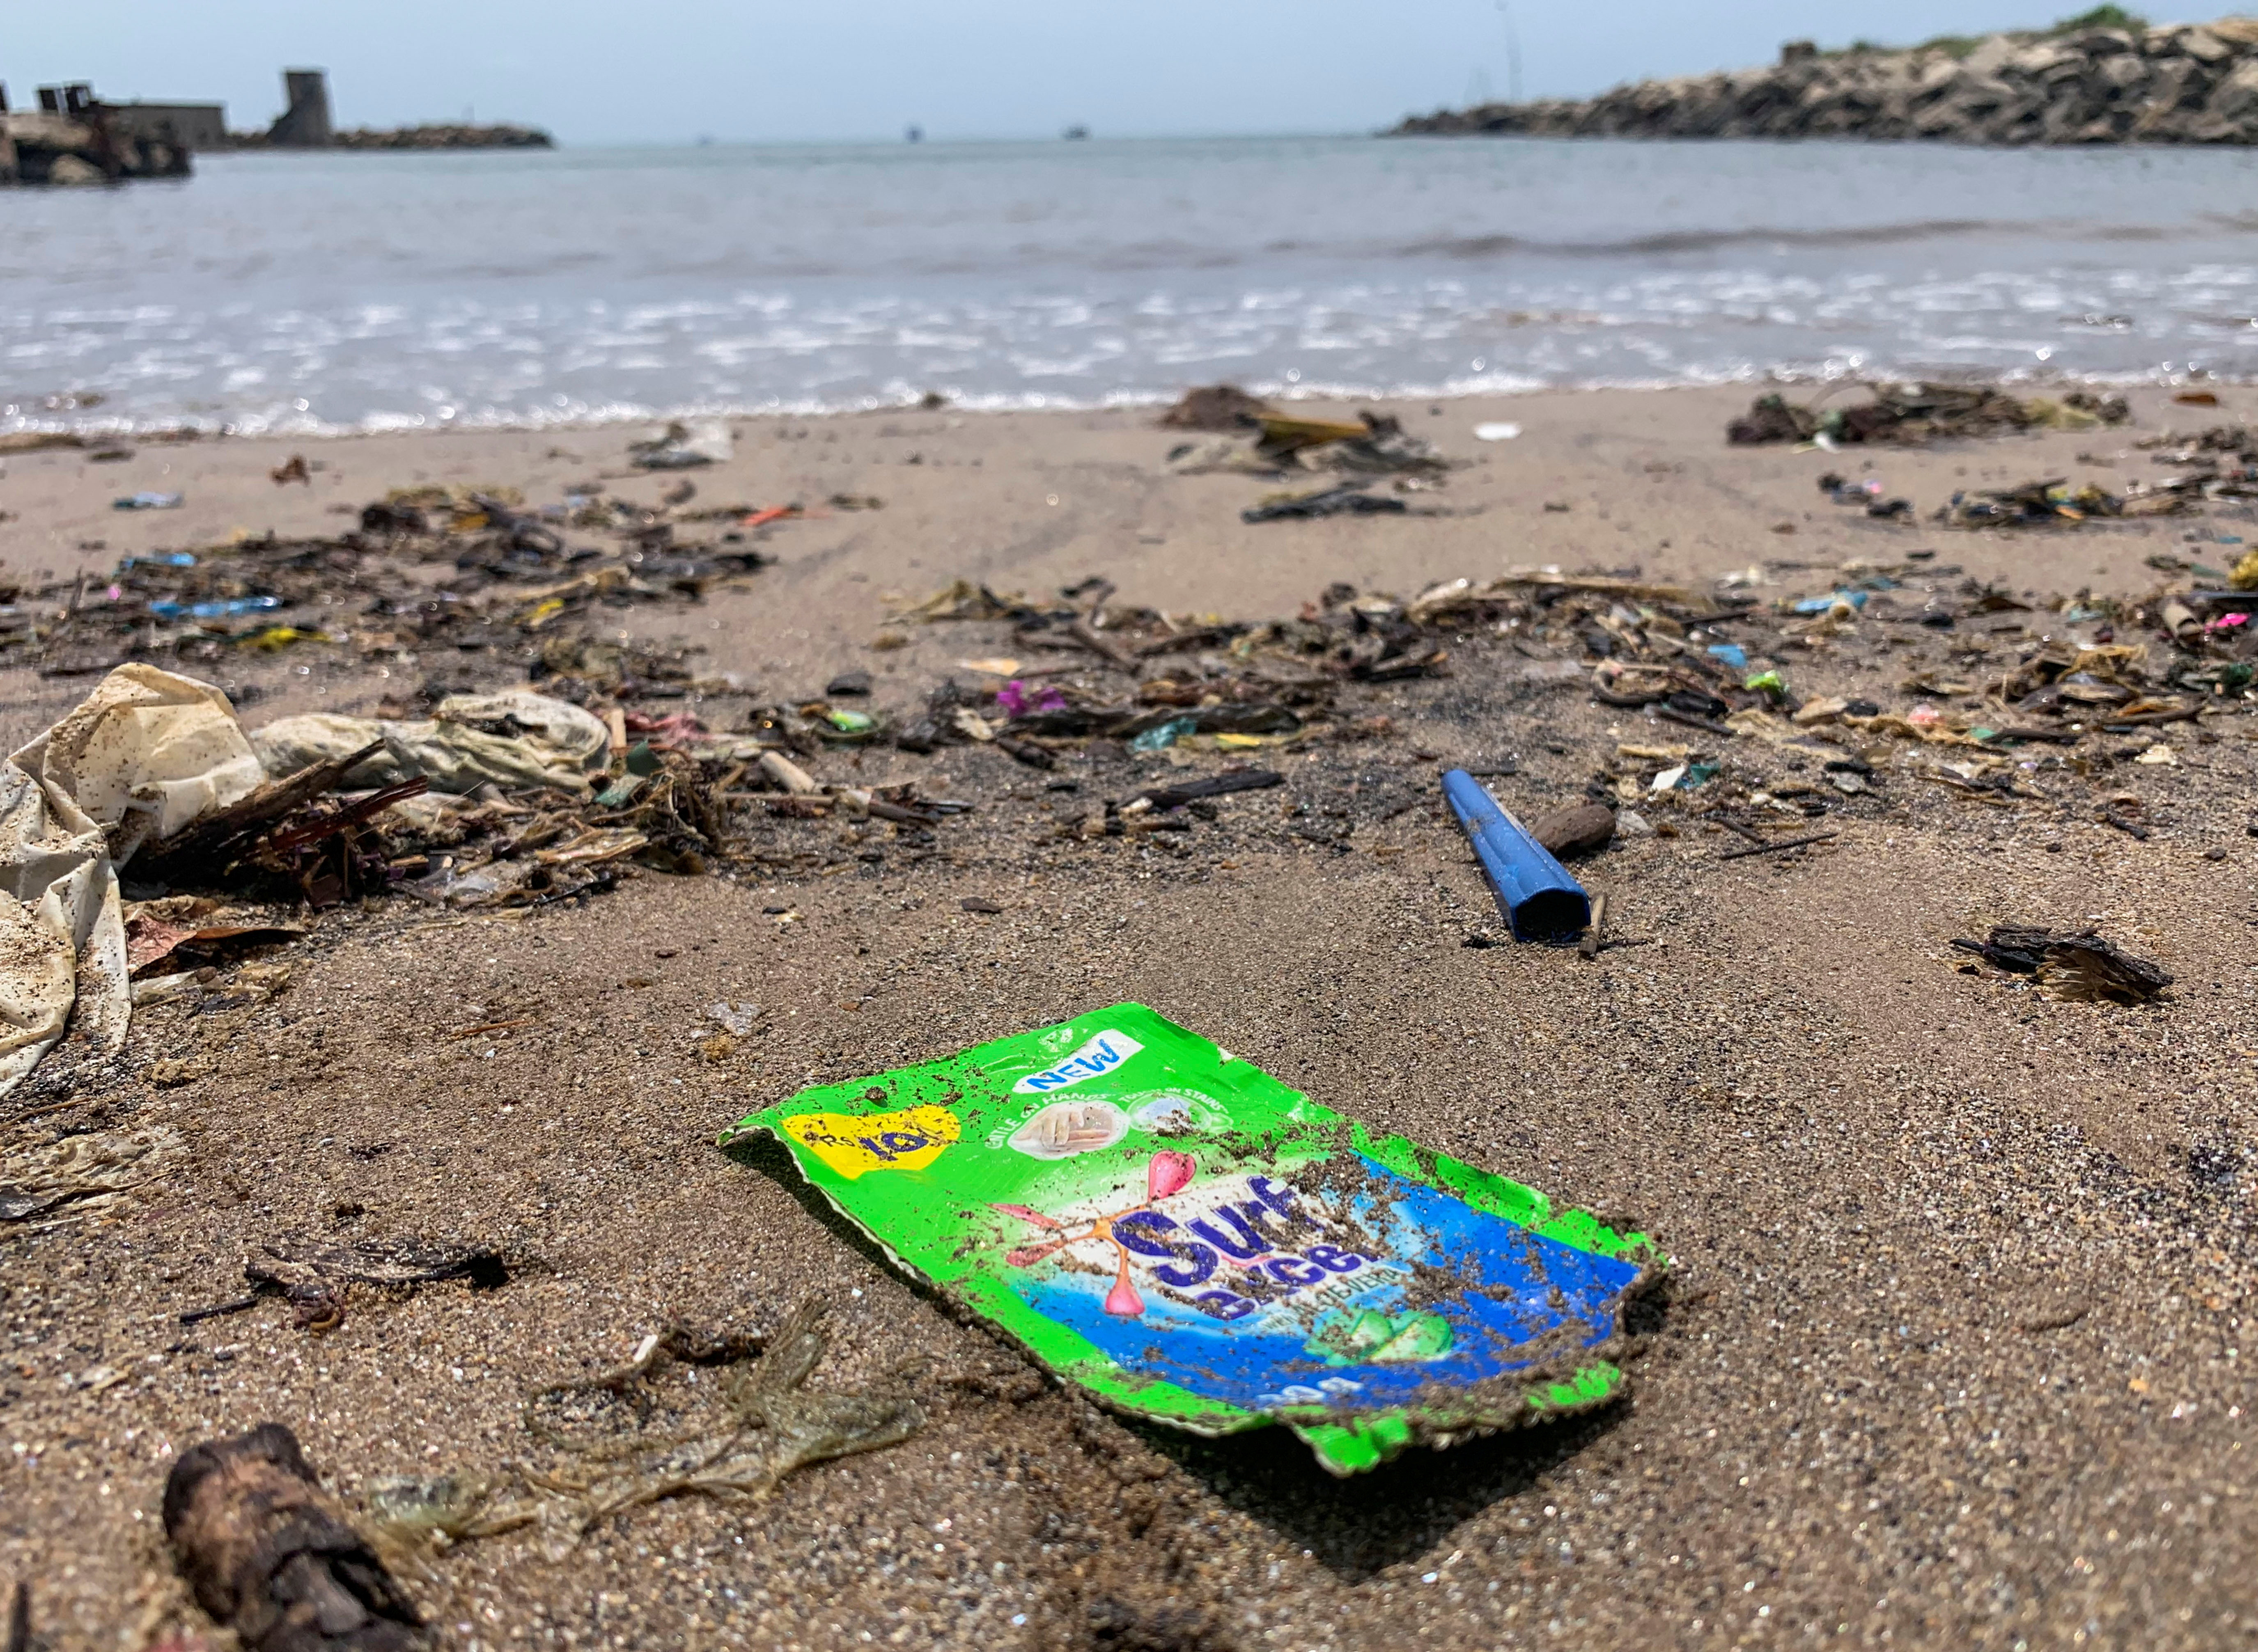 A view of an empty plastic sachet of Unilever's Surf Excel laundry detergent on a beach on Crow Island, Colombo